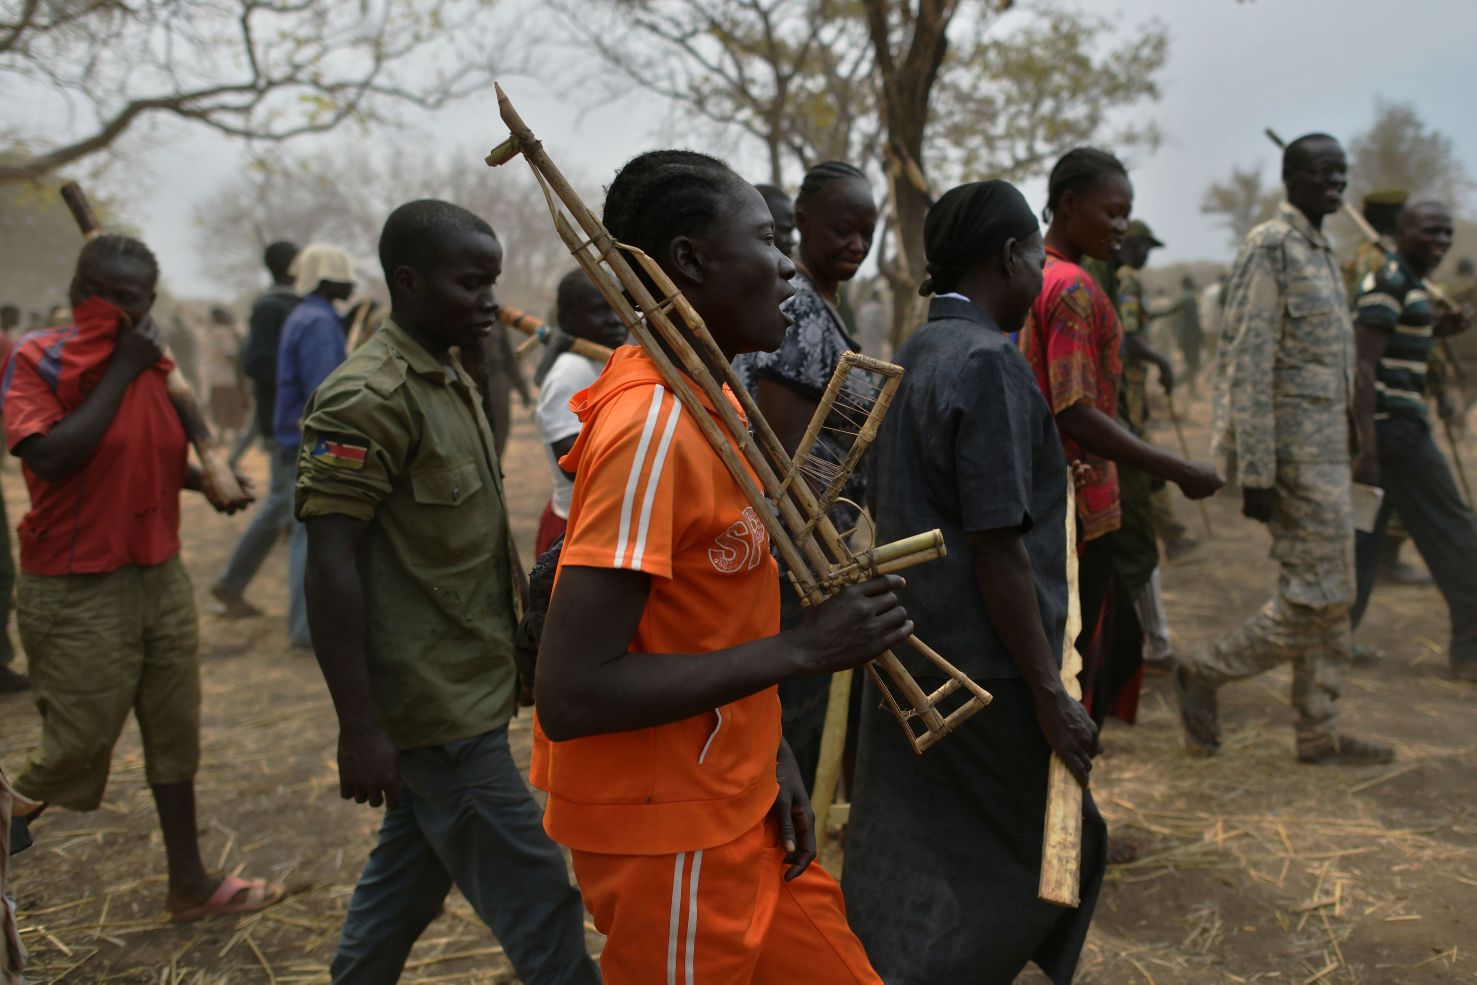 Trainee soldiers for a new unified army carry wooden rifles while attending a reconciliation programme run by the UN Mission in South Sudan (UNMISS) at a makeshift barracks in Mapel in January 2020. The South Sudanese armed forces are being plagued by defections, which threaten to undermine the government’s already-weak grasp of stability in the country. (Tony Karumba/AFP via Getty Images)